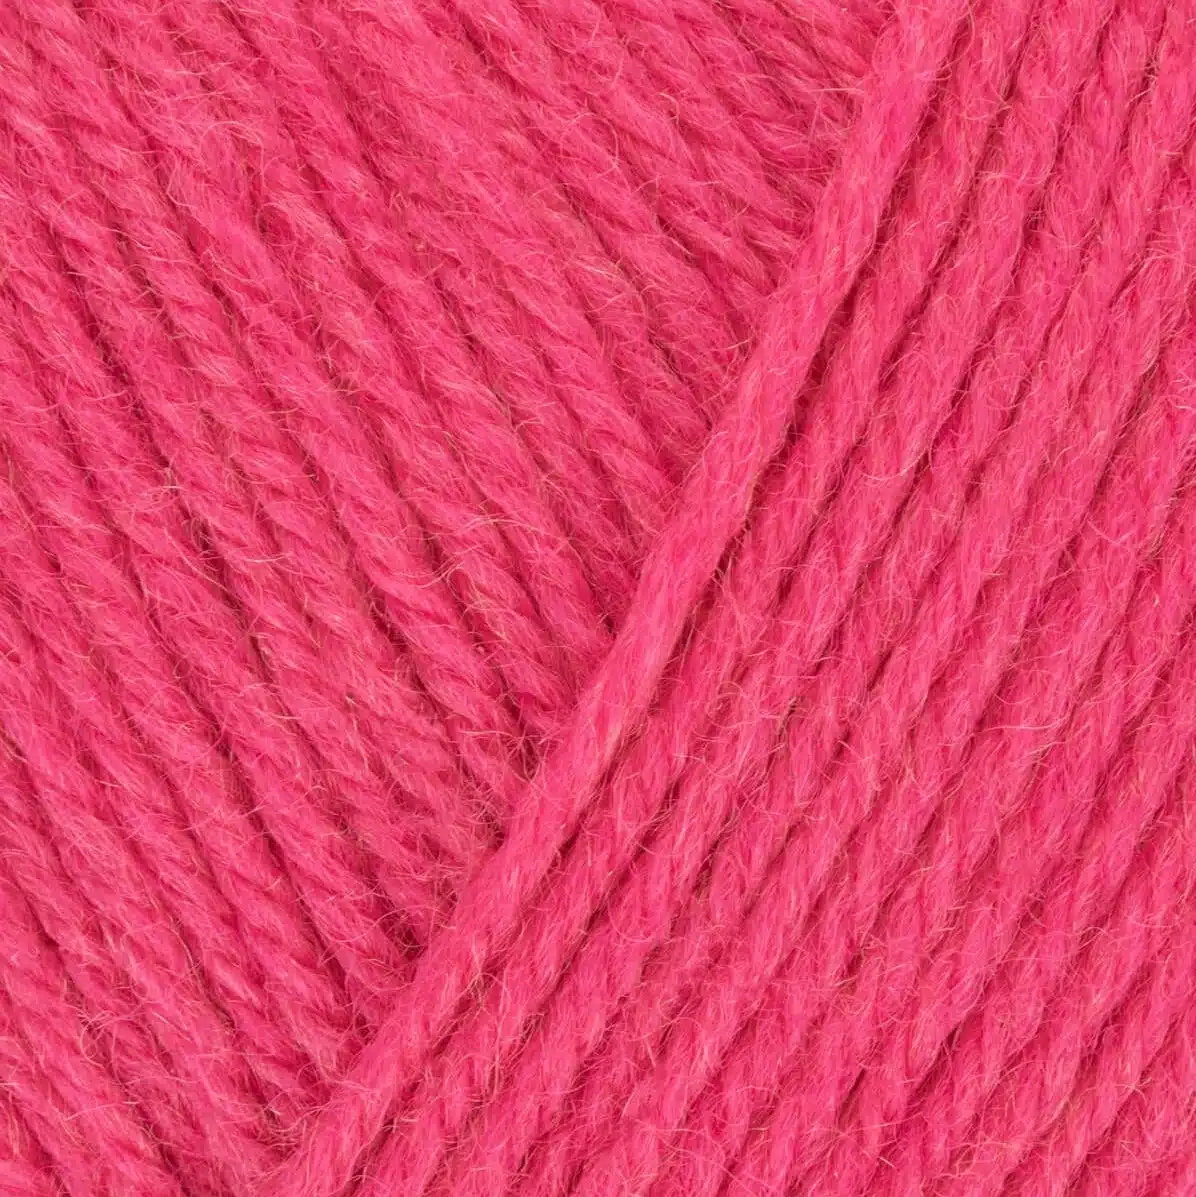 West Yorkshire Spinners ColourLab - Cerise Pink 539